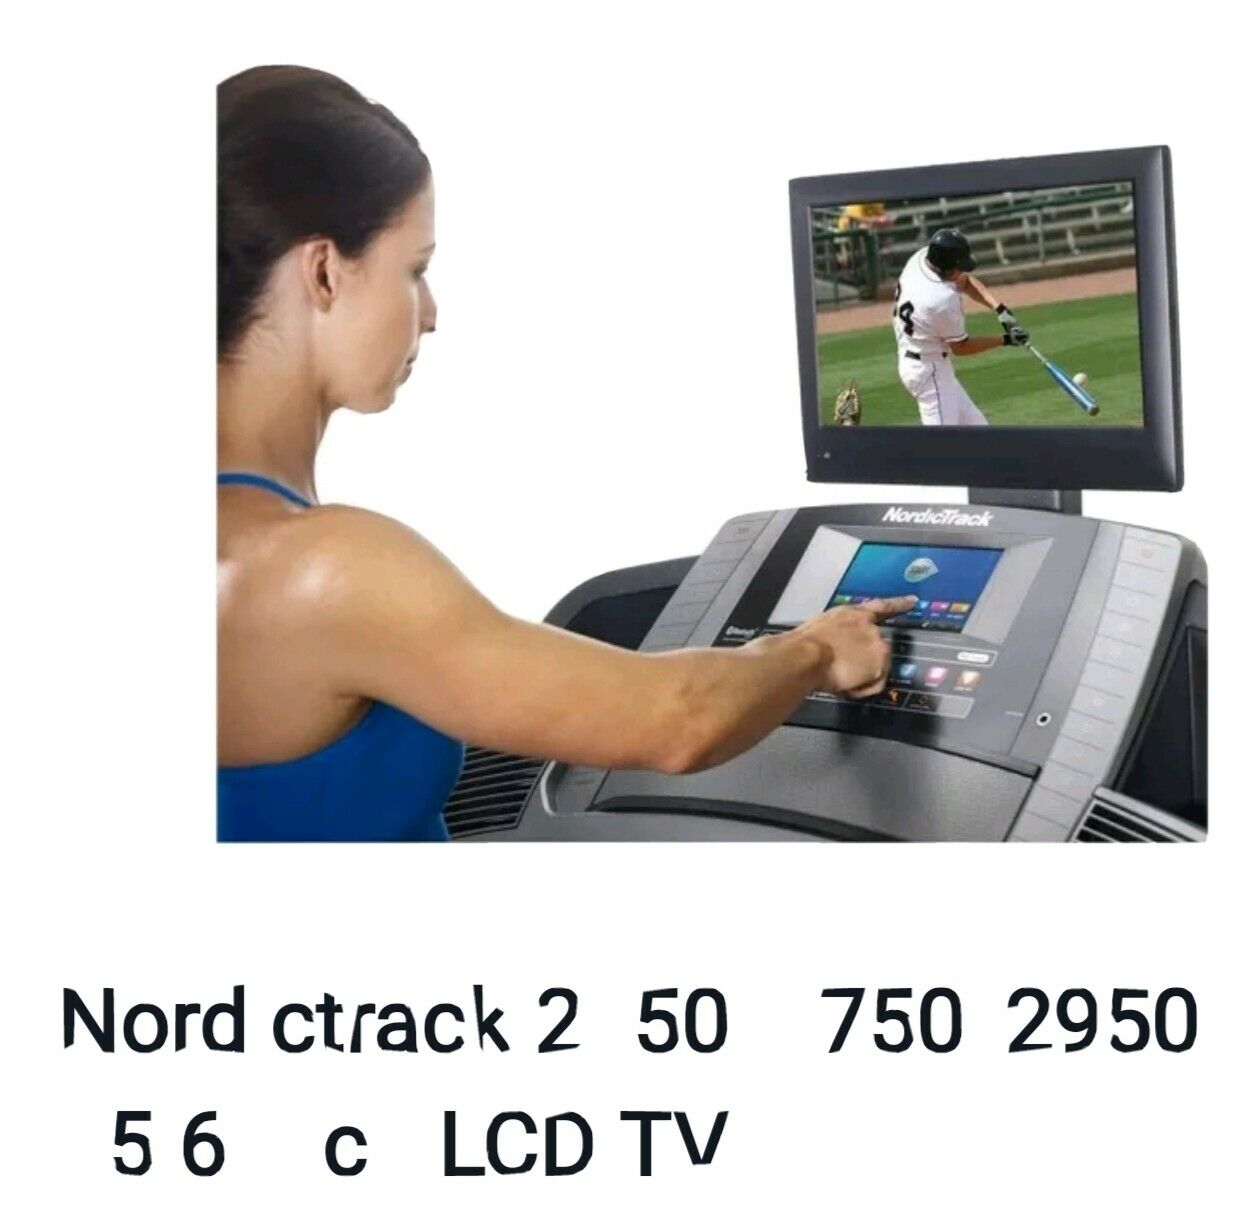 Nordictrack 2450, 1750, 2950 15.6 Inch Lcd Tv